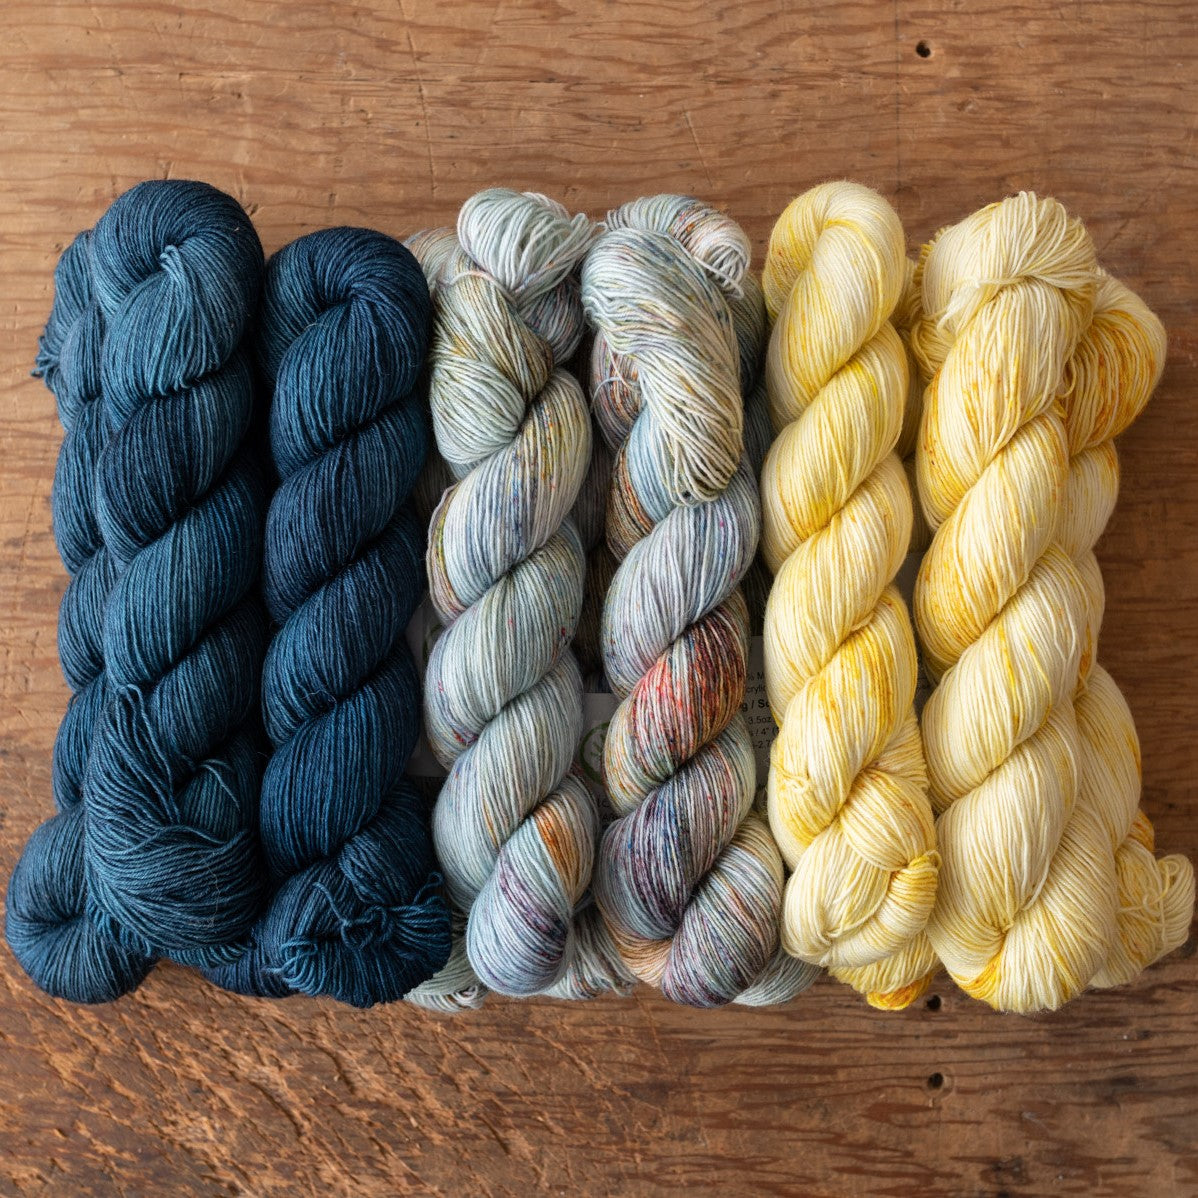 Dyeing for Weaving: Caroline Sommerfeld from Ancient Arts Yarn